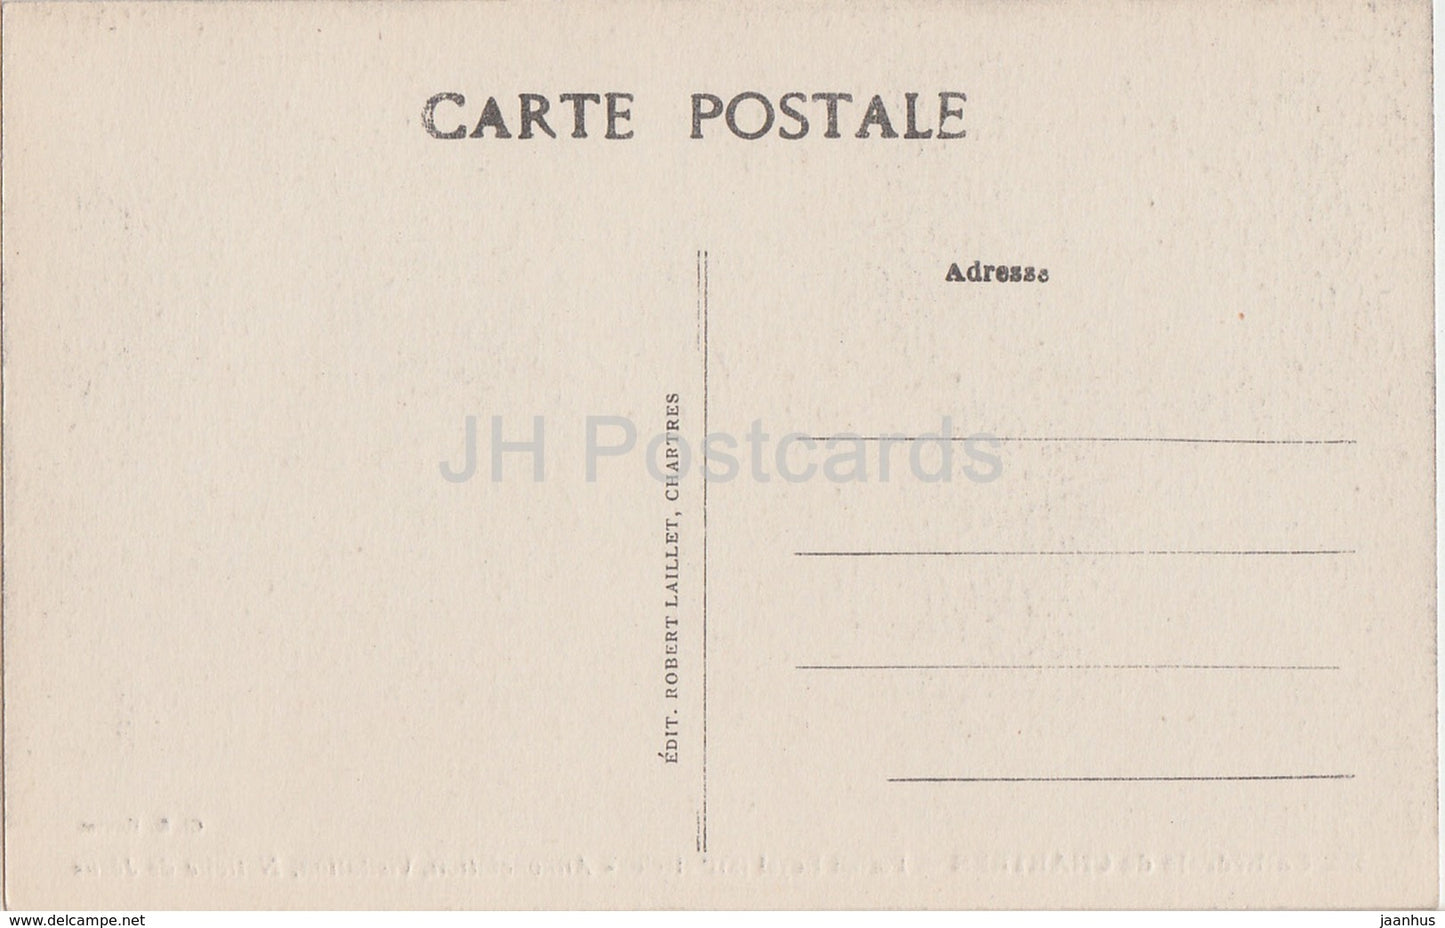 Cathedrale de Chartres - Portail Royal - Annonciation - Visitation - 155 - cathedral - old postcard - France - unused